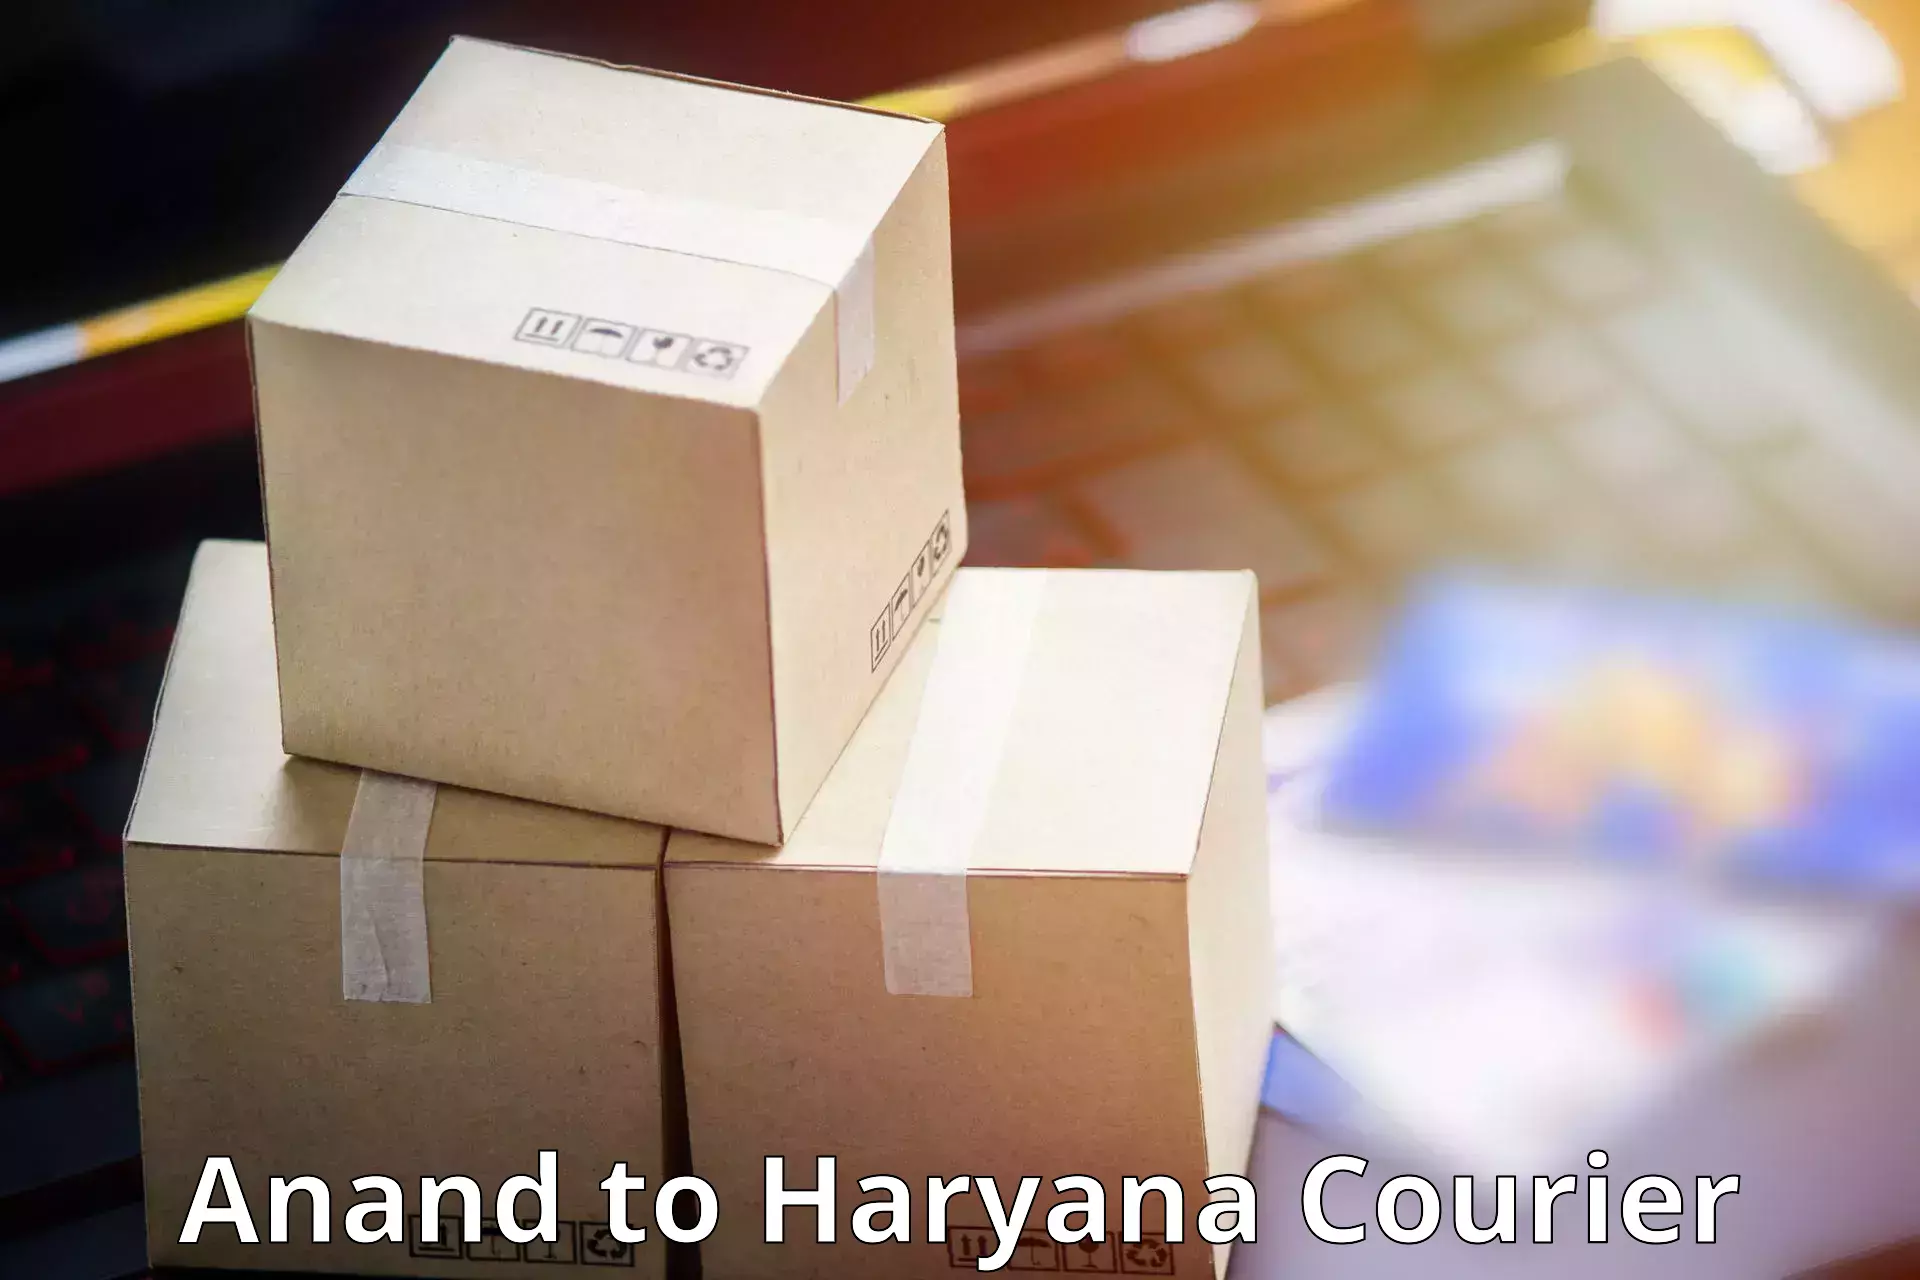 Personalized courier experiences Anand to NCR Haryana